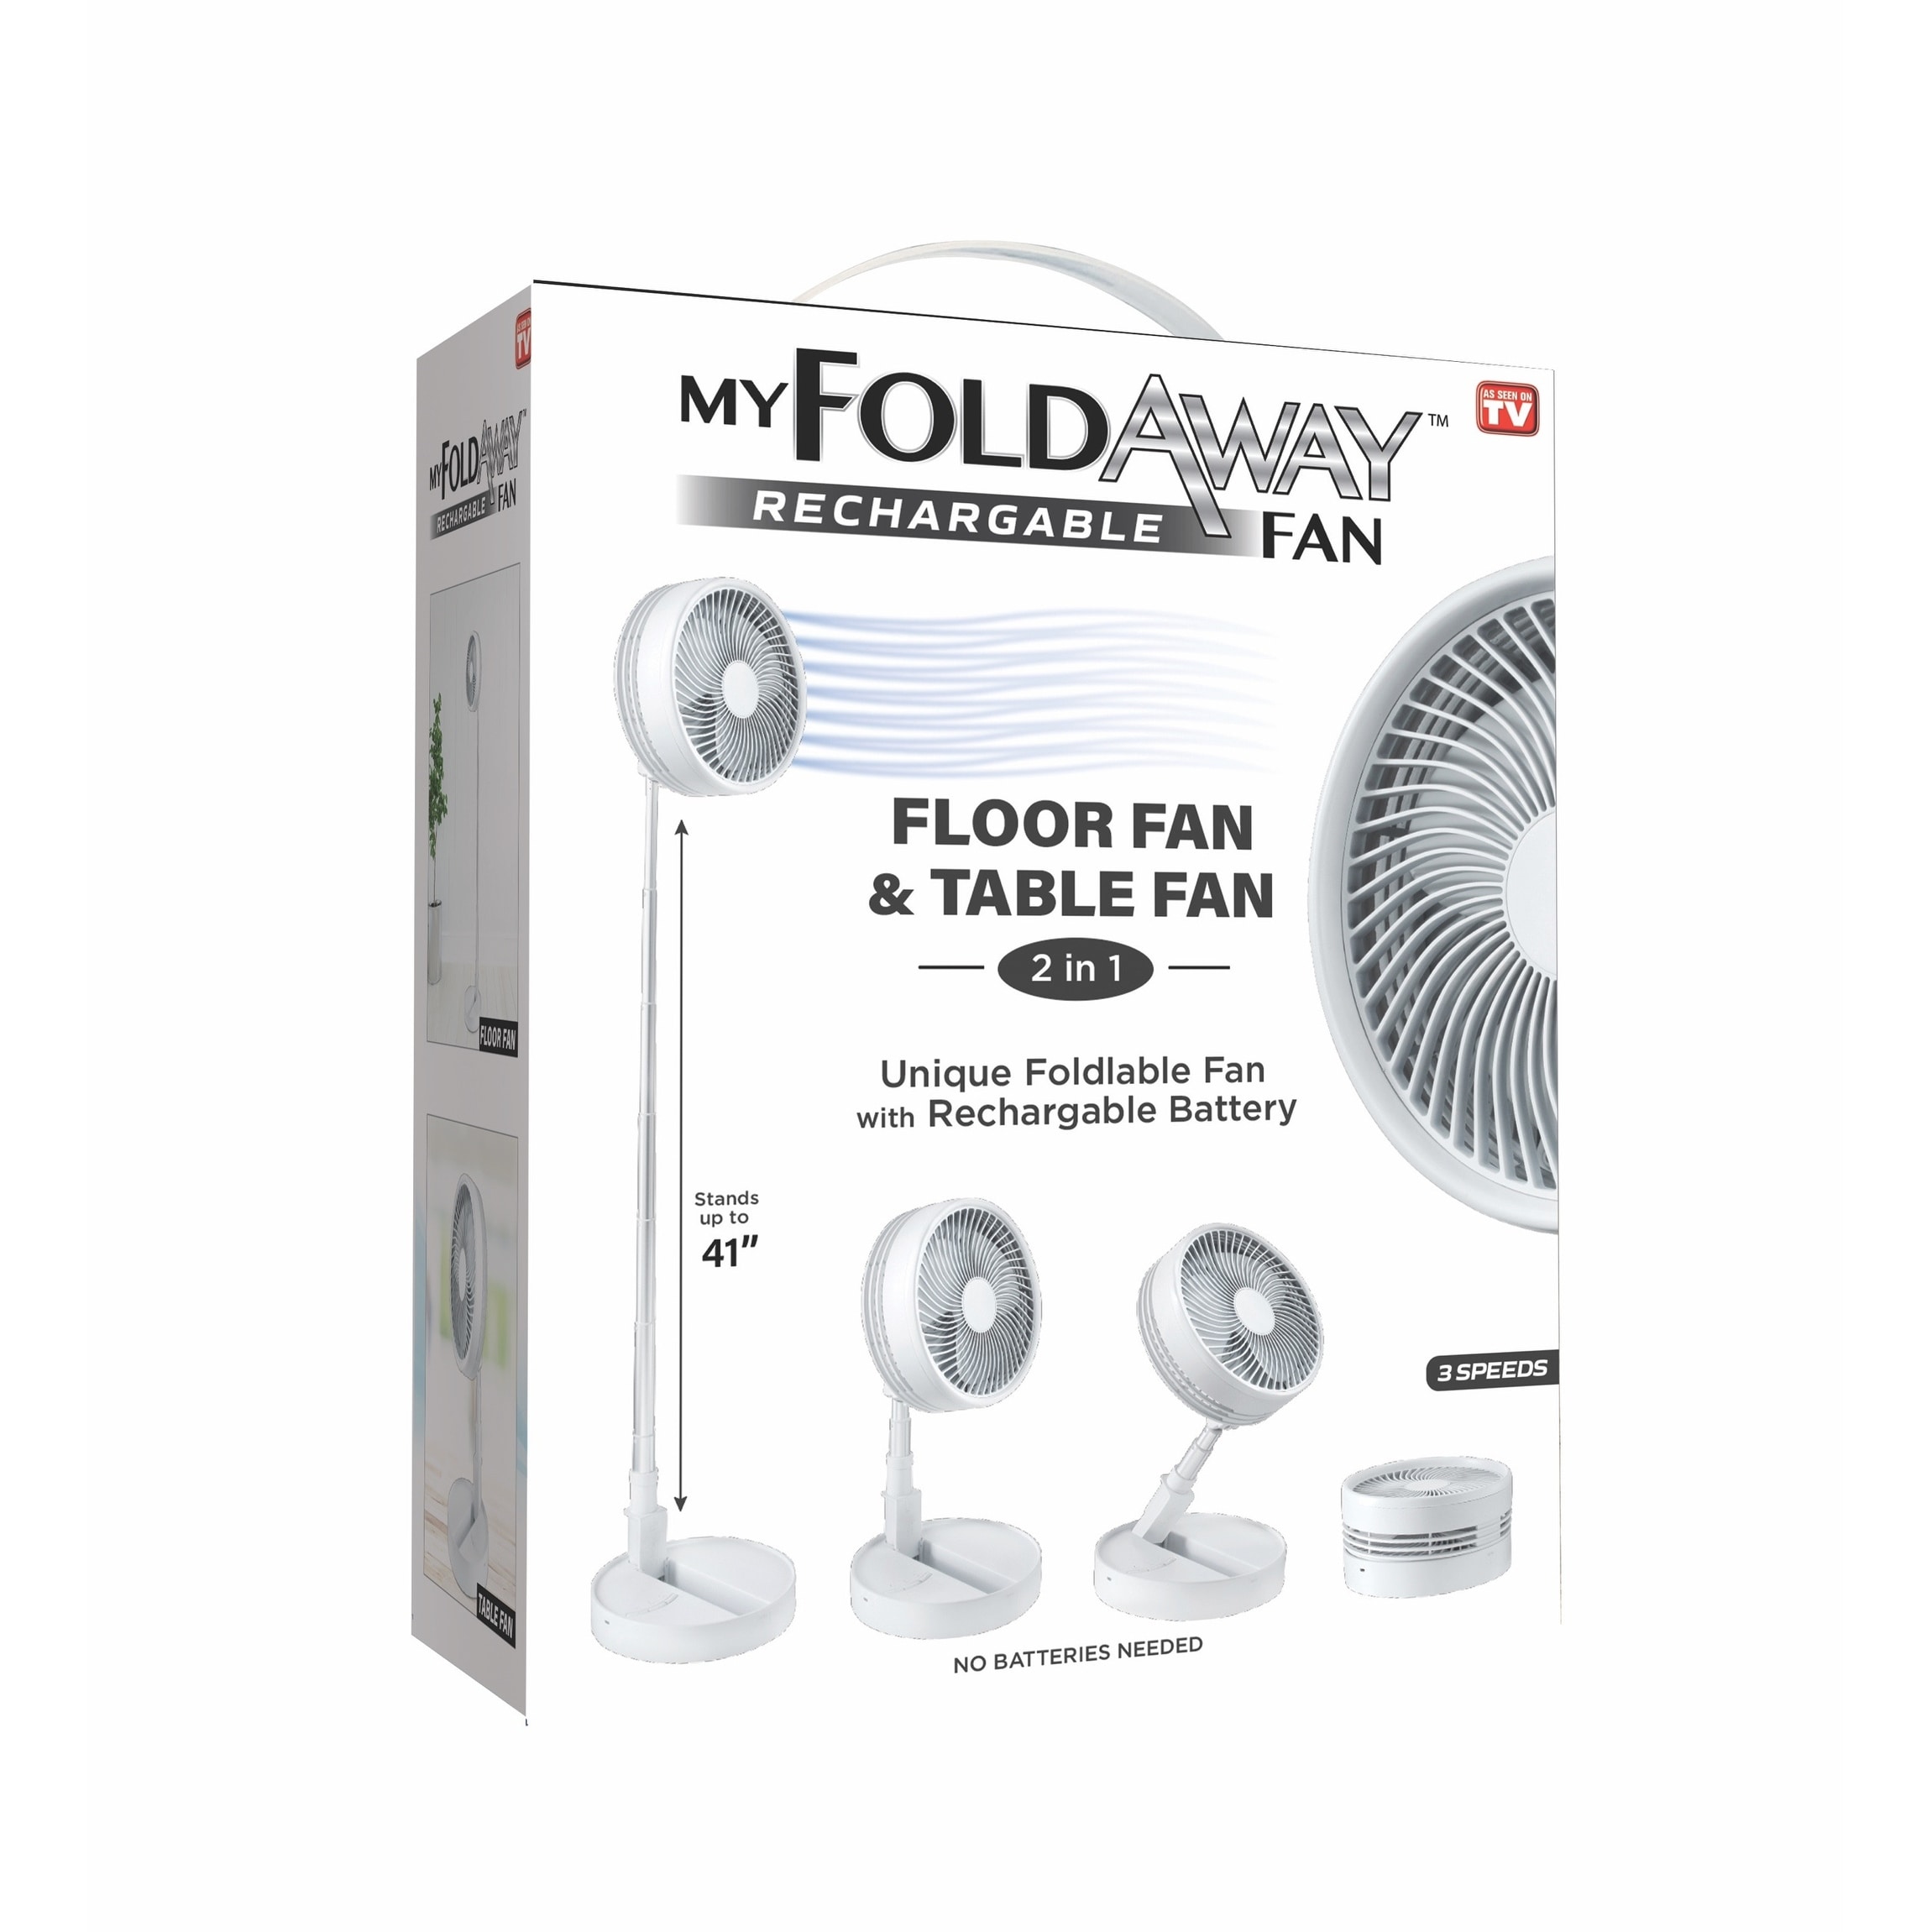 MY FOLDAWAY FAN Rechargeable Ultra Lightweight Portable Compact Floor & Table